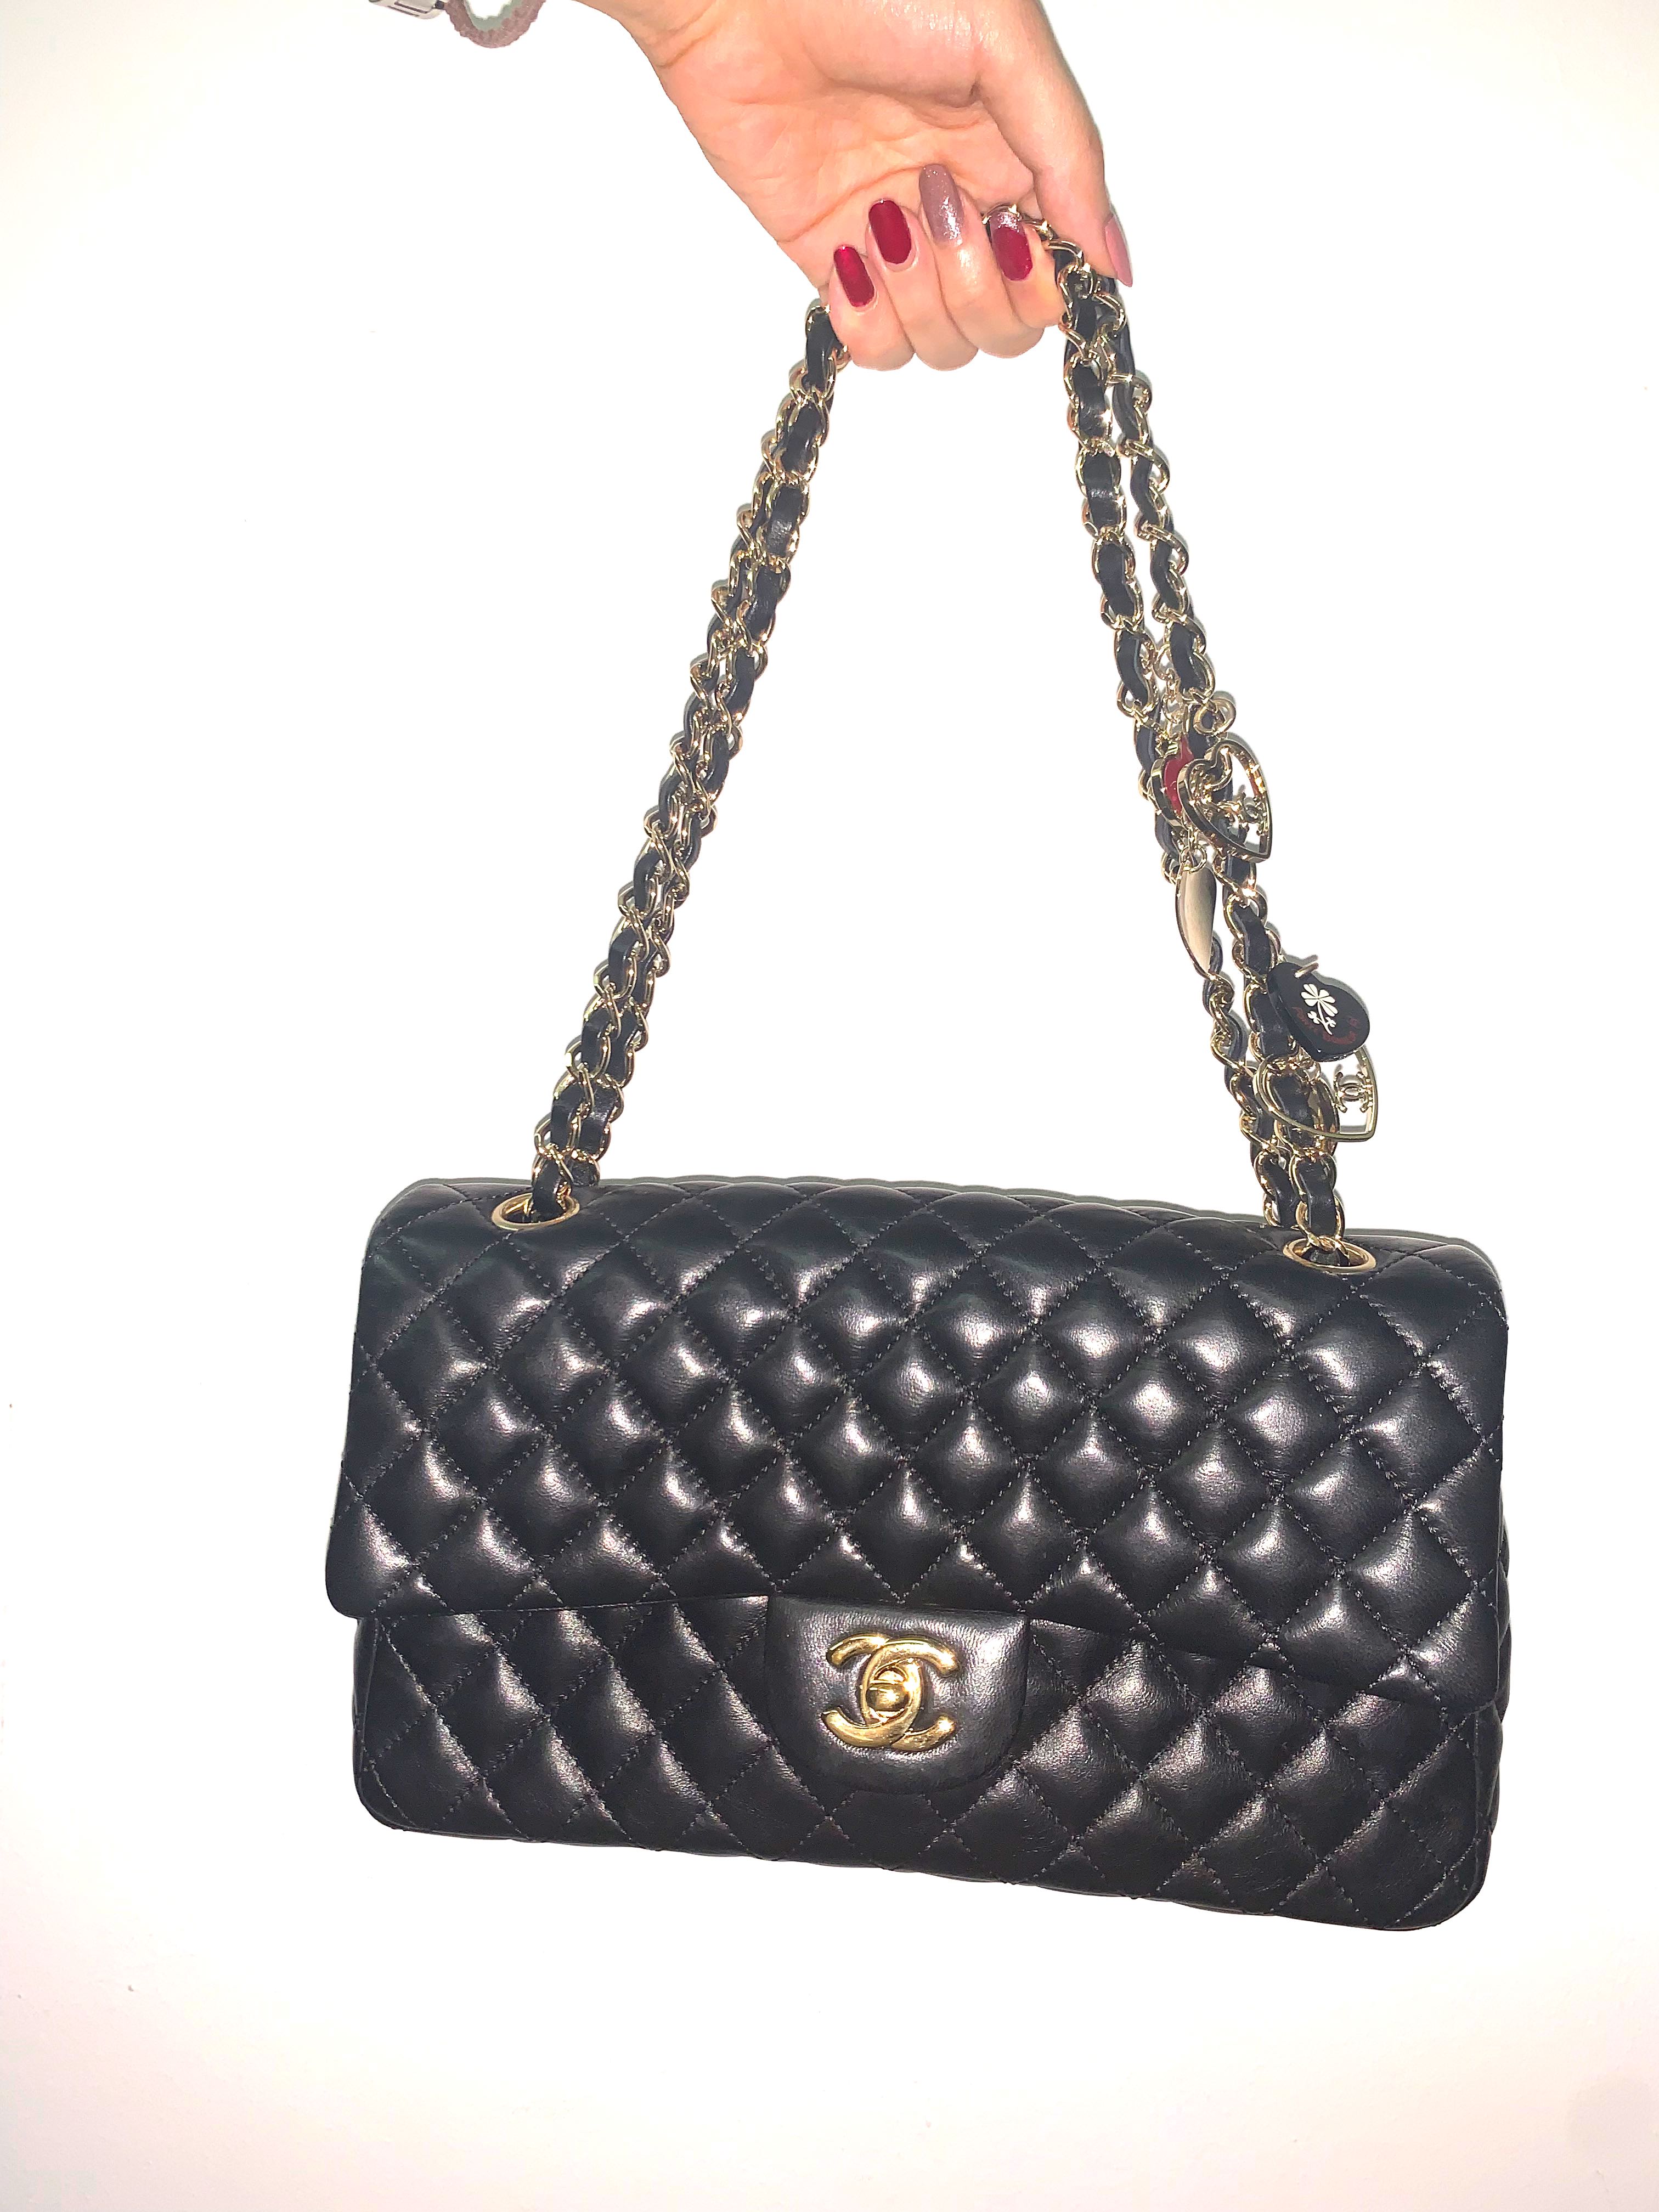 CHANEL Lambskin Quilted Valentine Charms Medium Flap Red 1193374